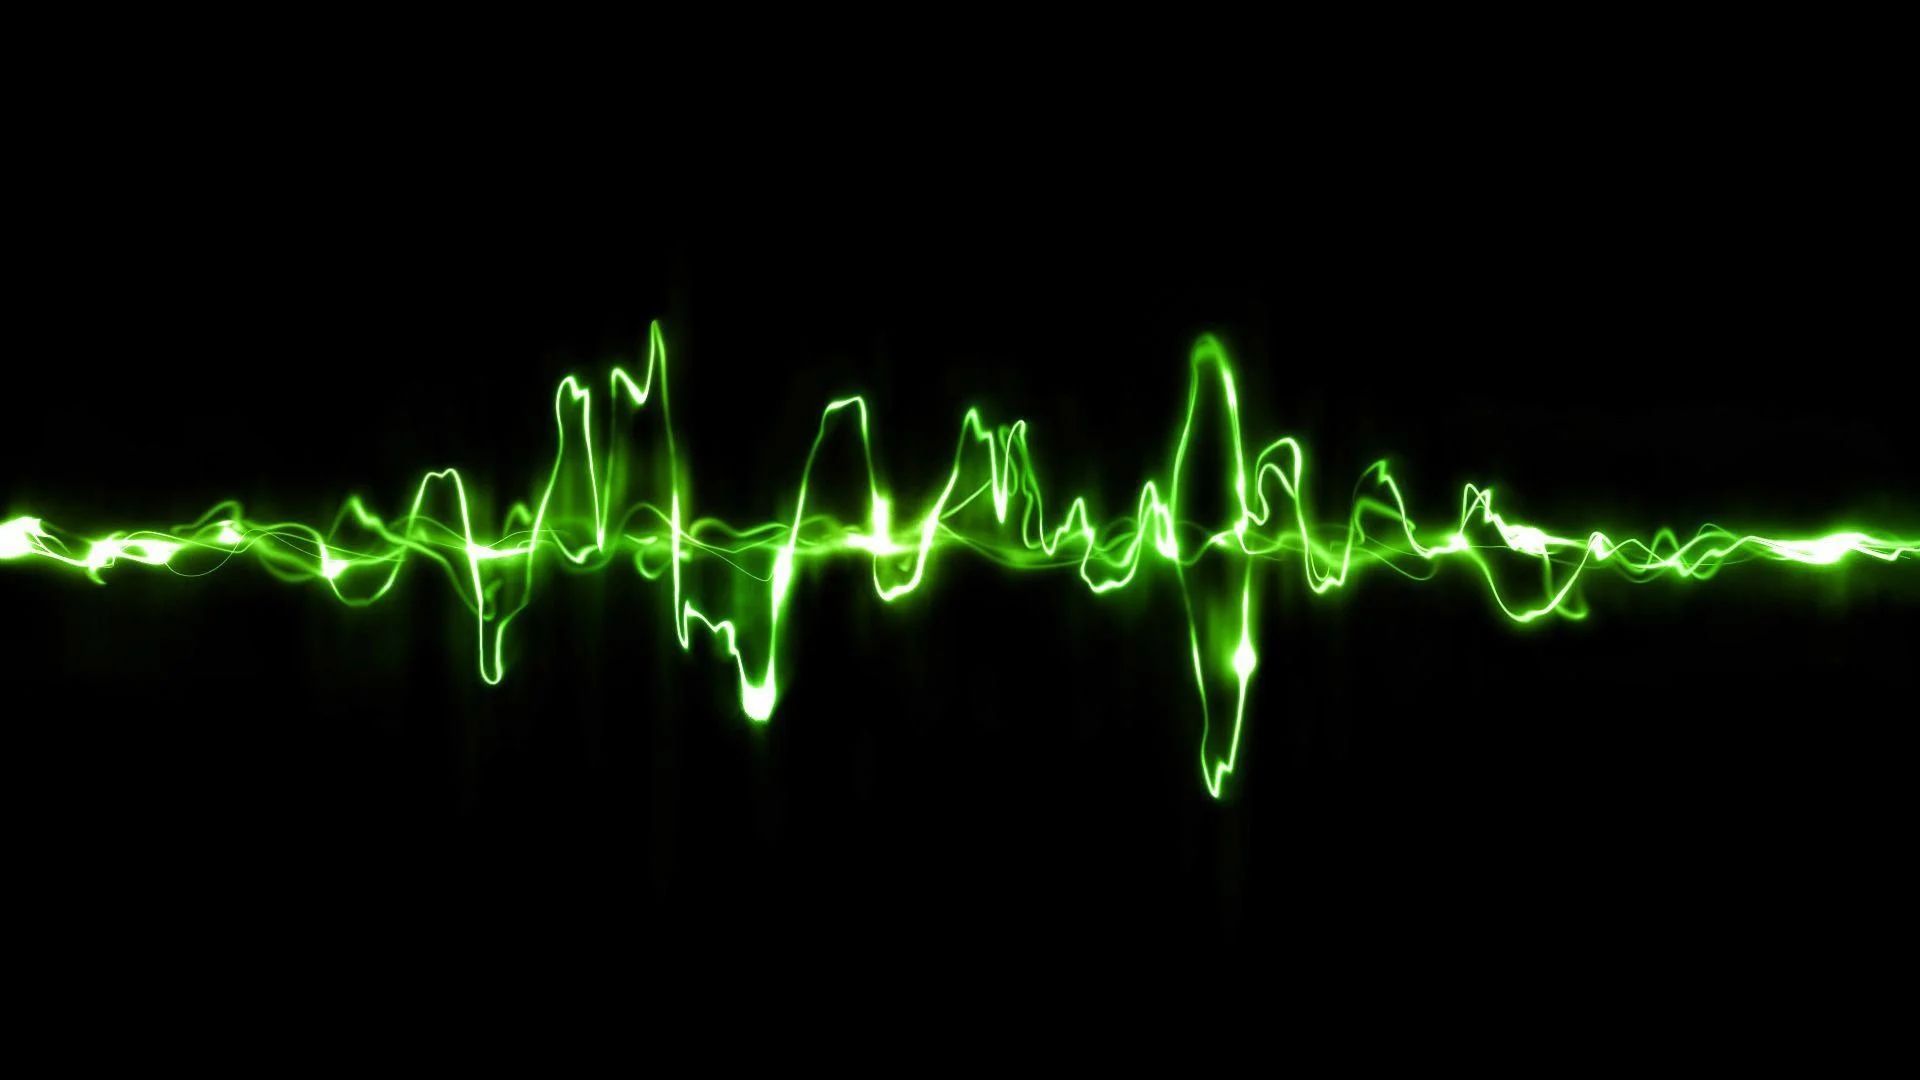 A green sound wave on a black background - Neon green, lime green